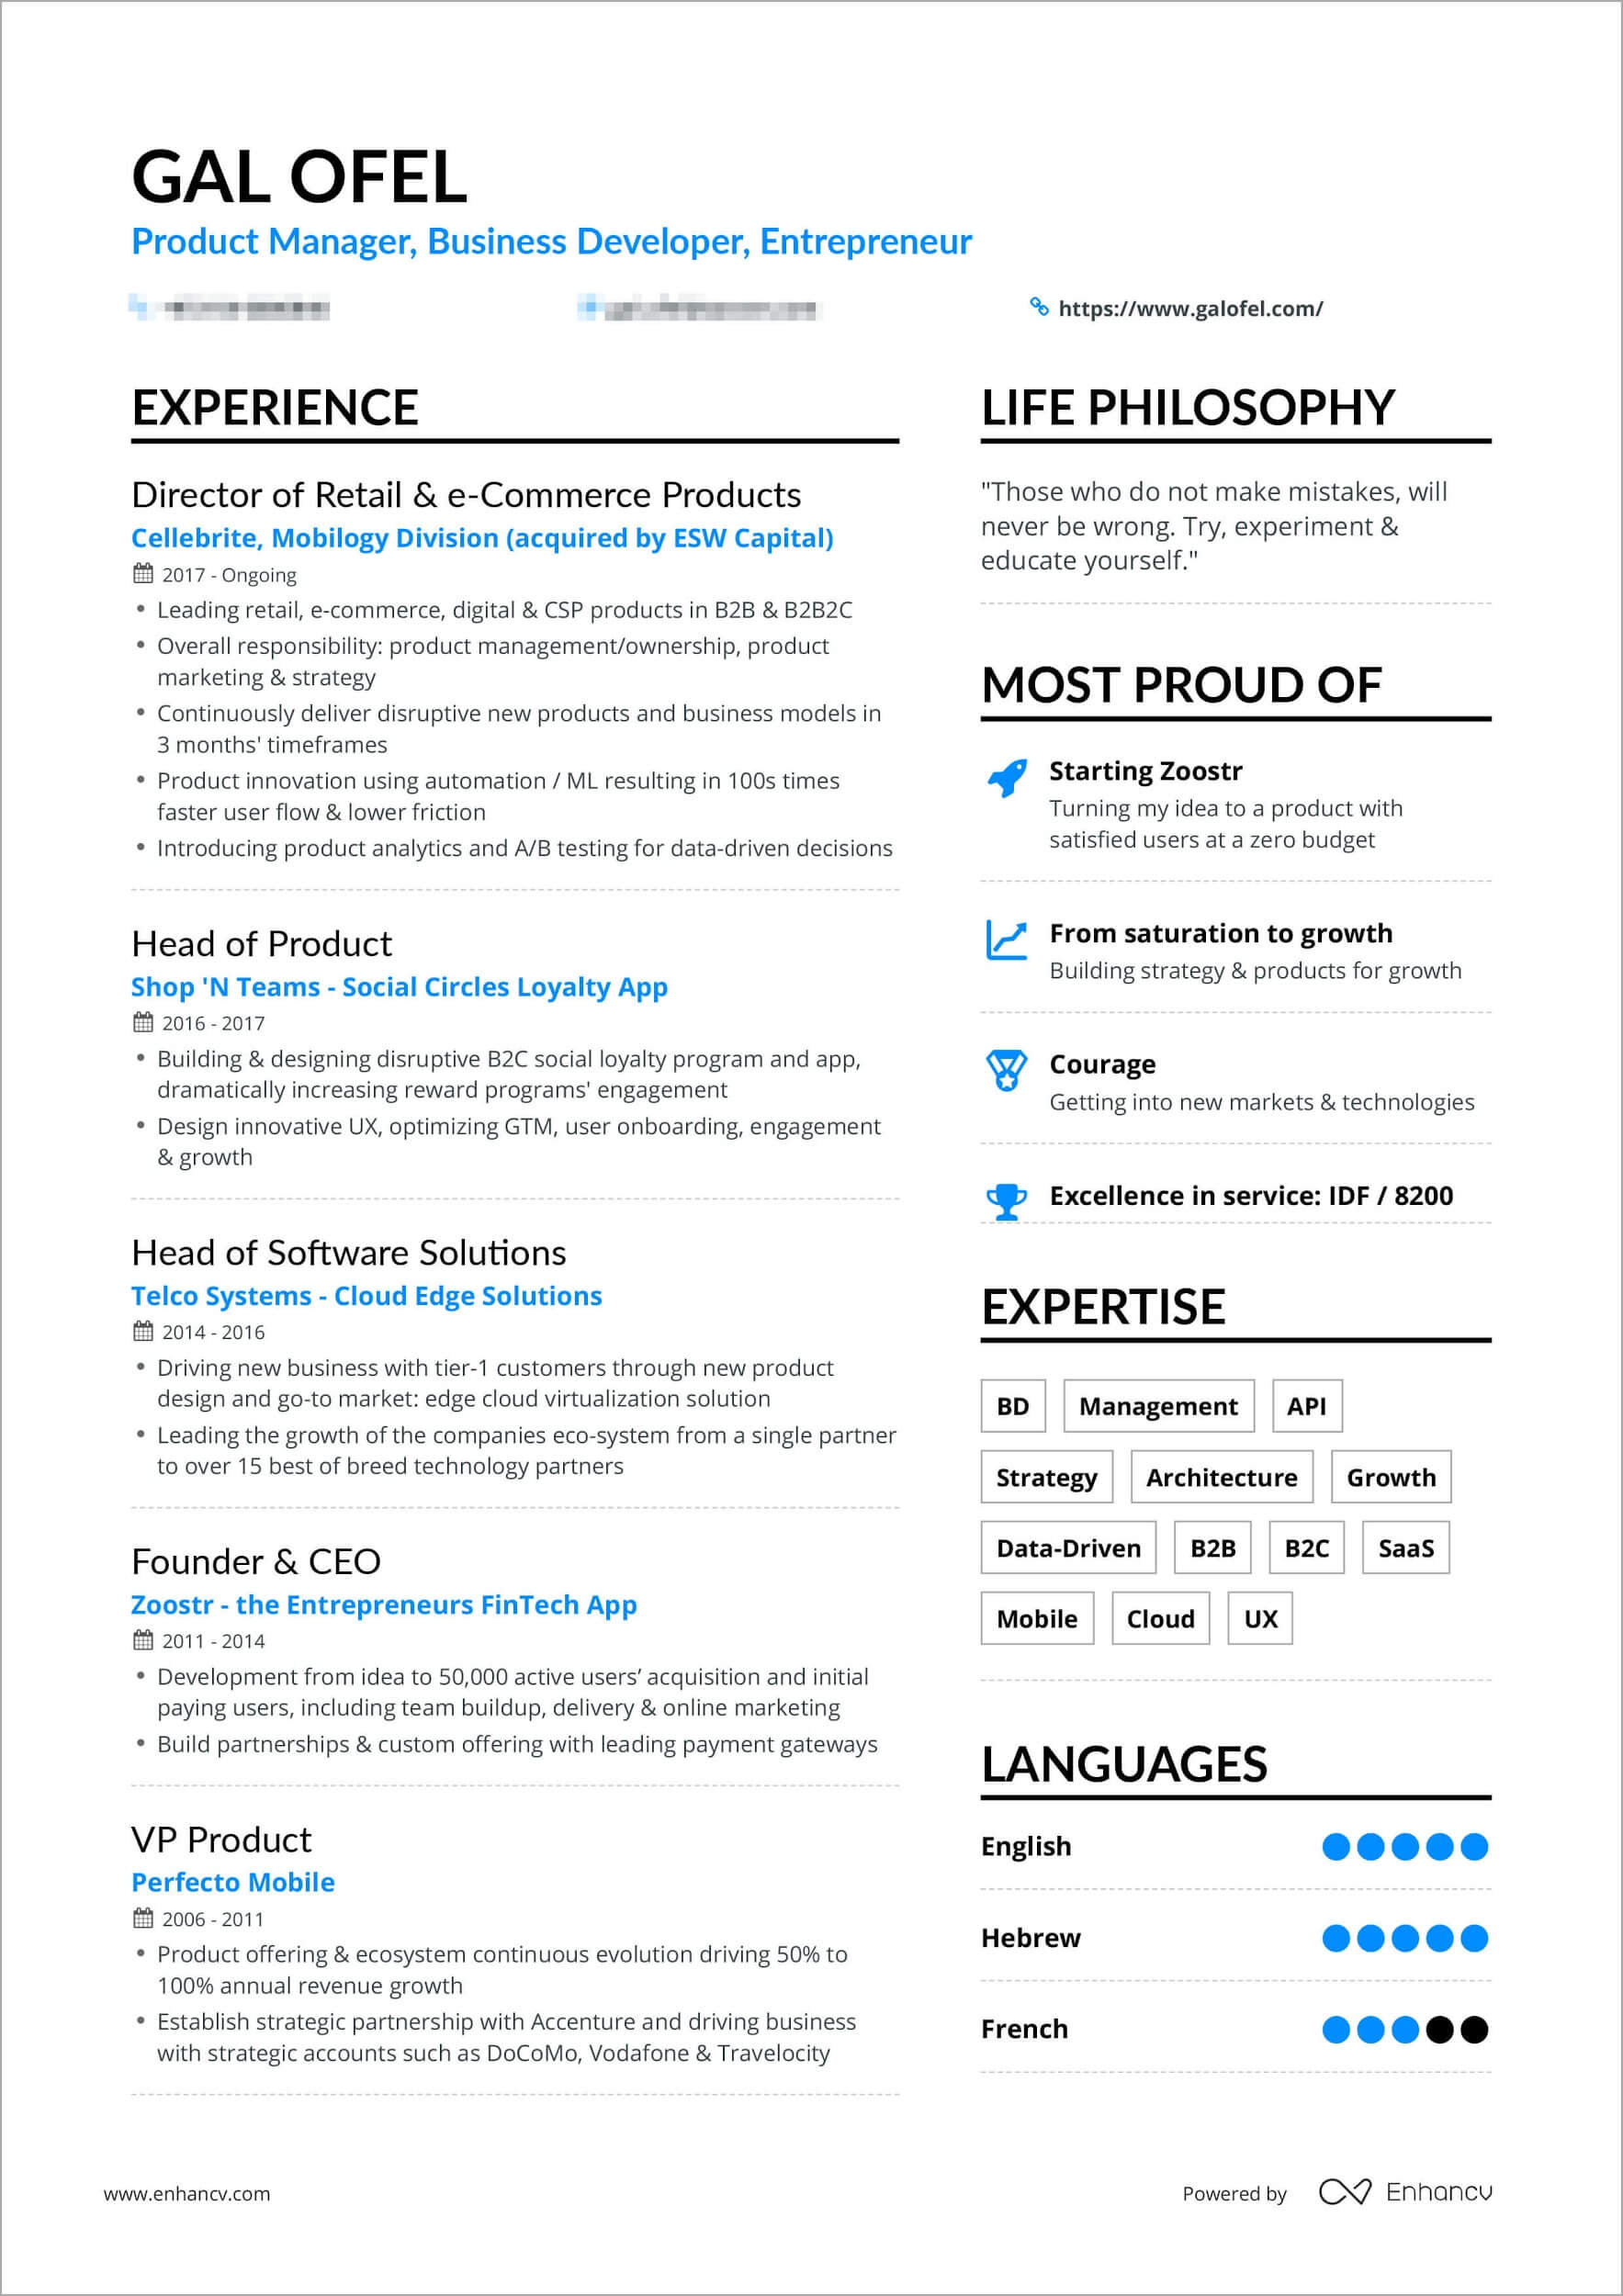 Resume Length: How Long Should a Resume Be in 2022